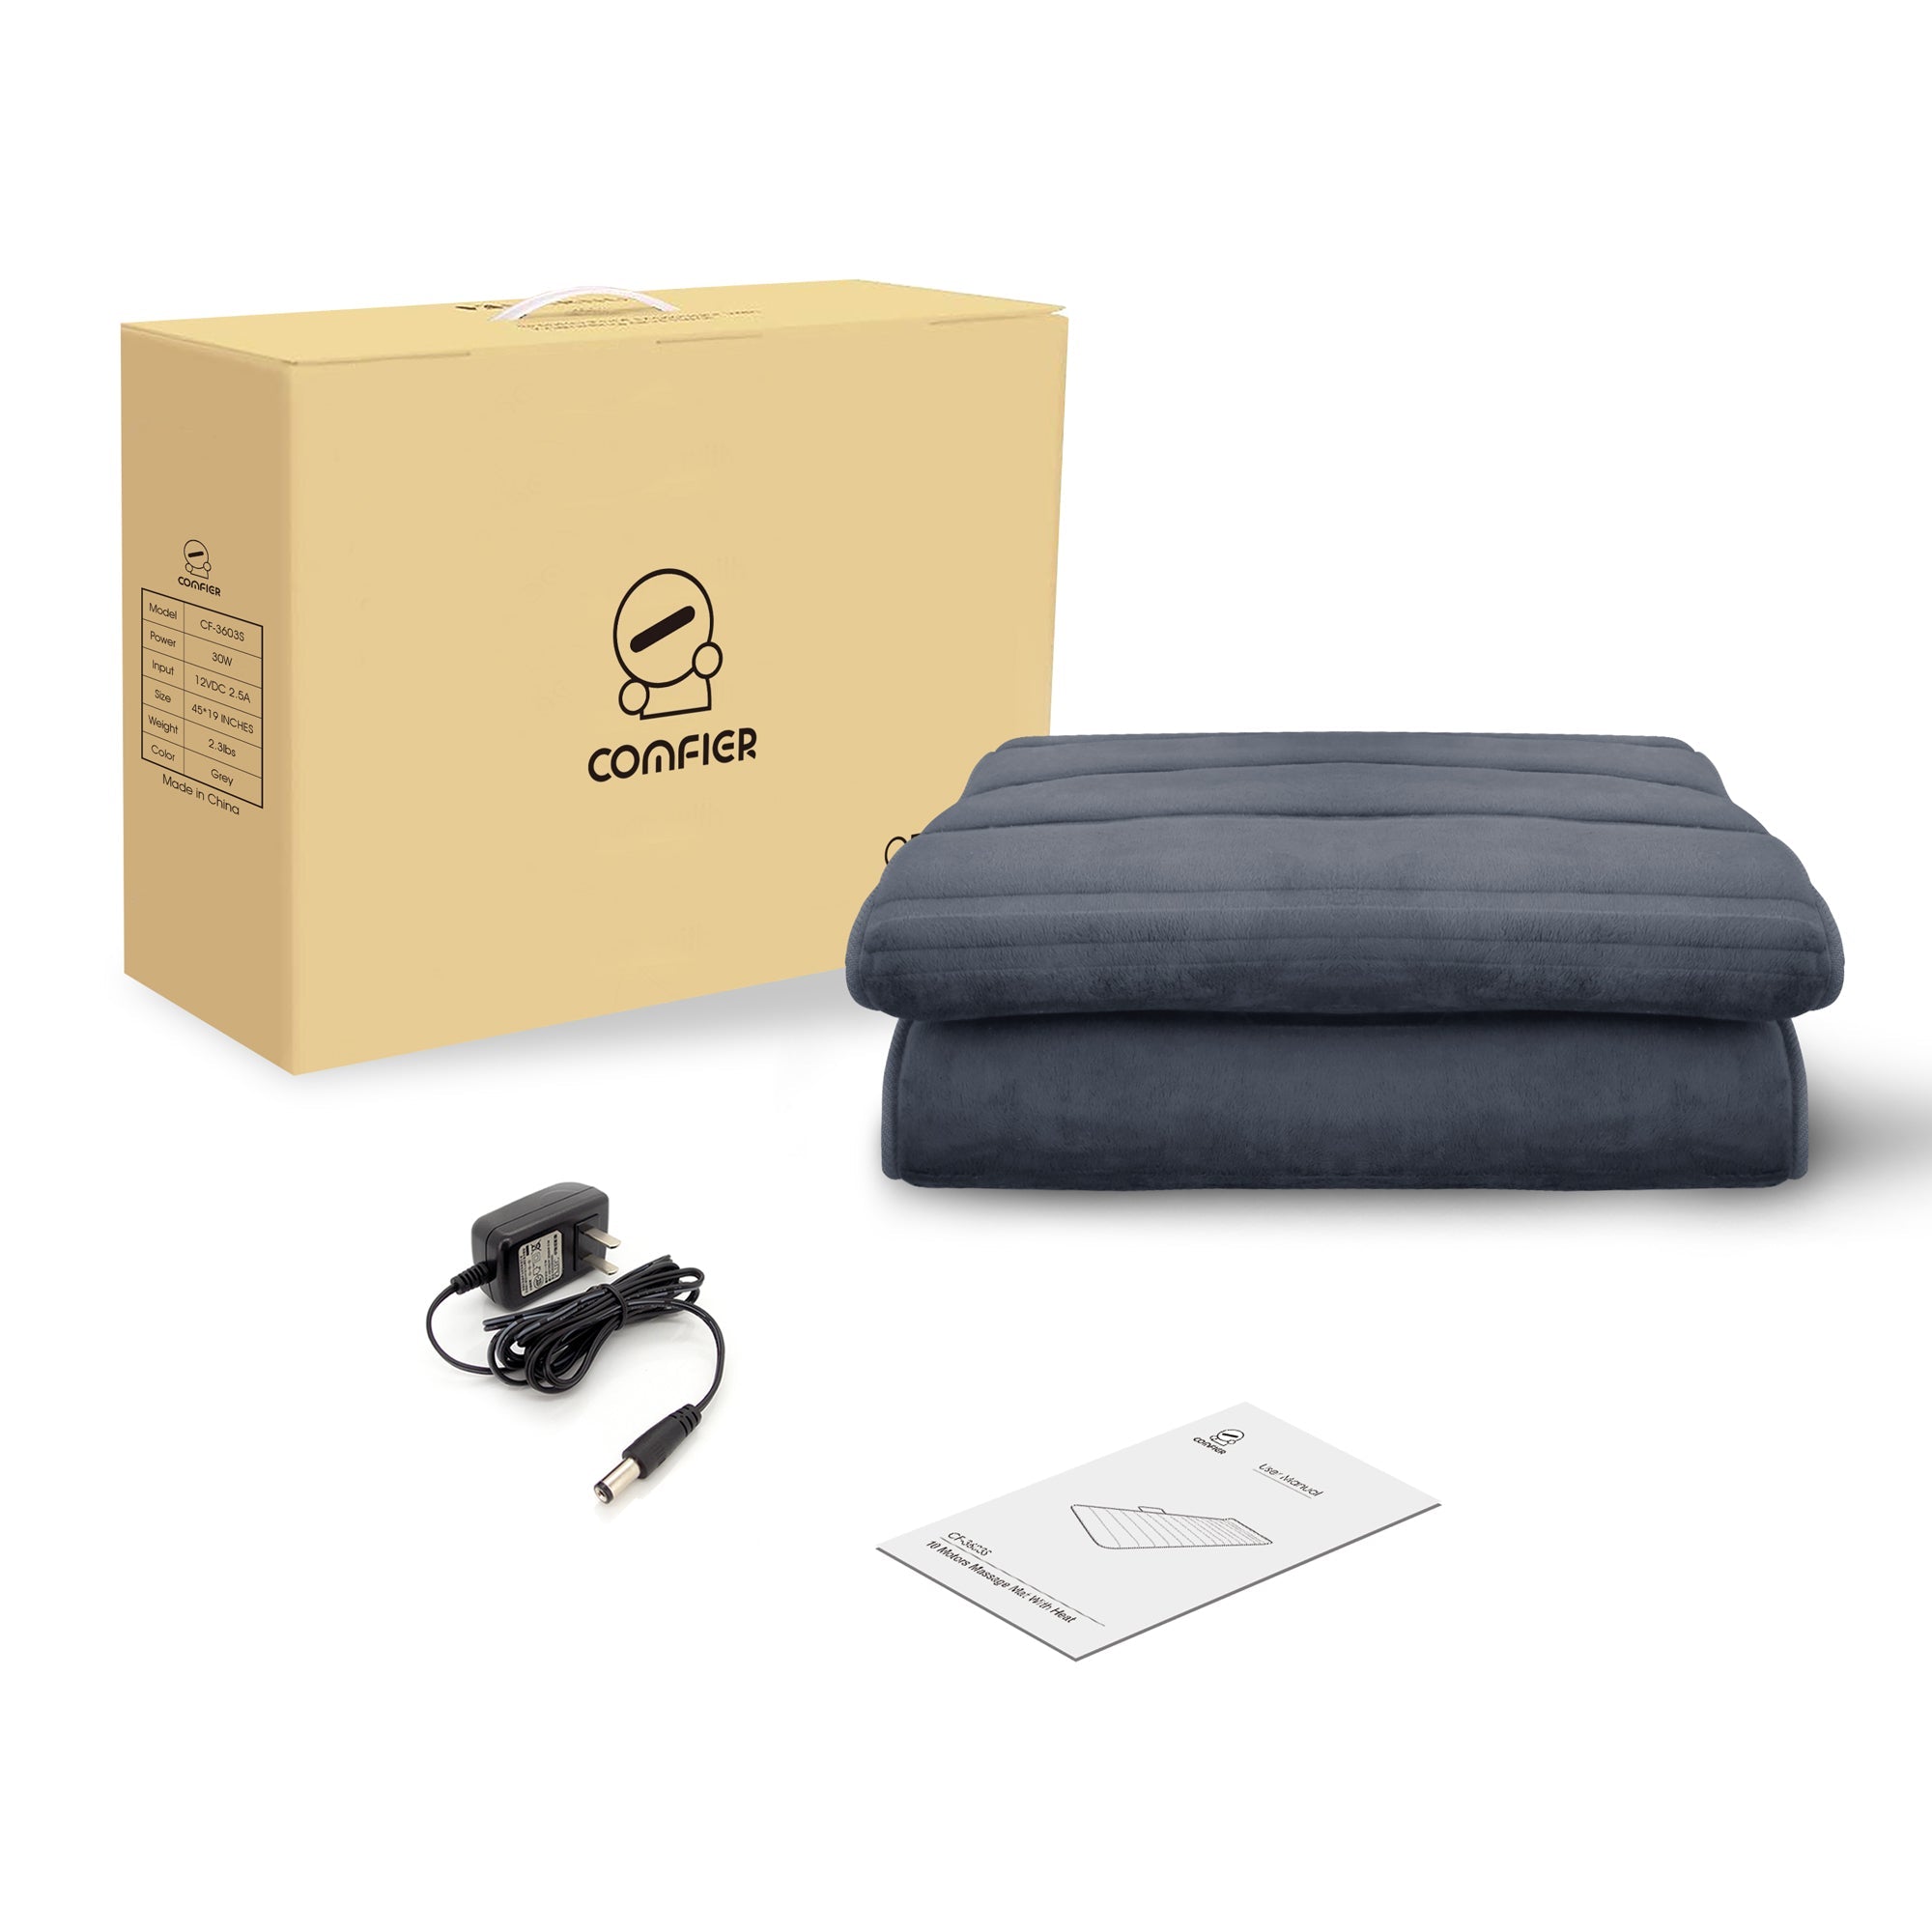 Copy of Comfier Full Body Massage Mat with Heat & Vibration Motors & 2 Therapy Heating pad - 3603S